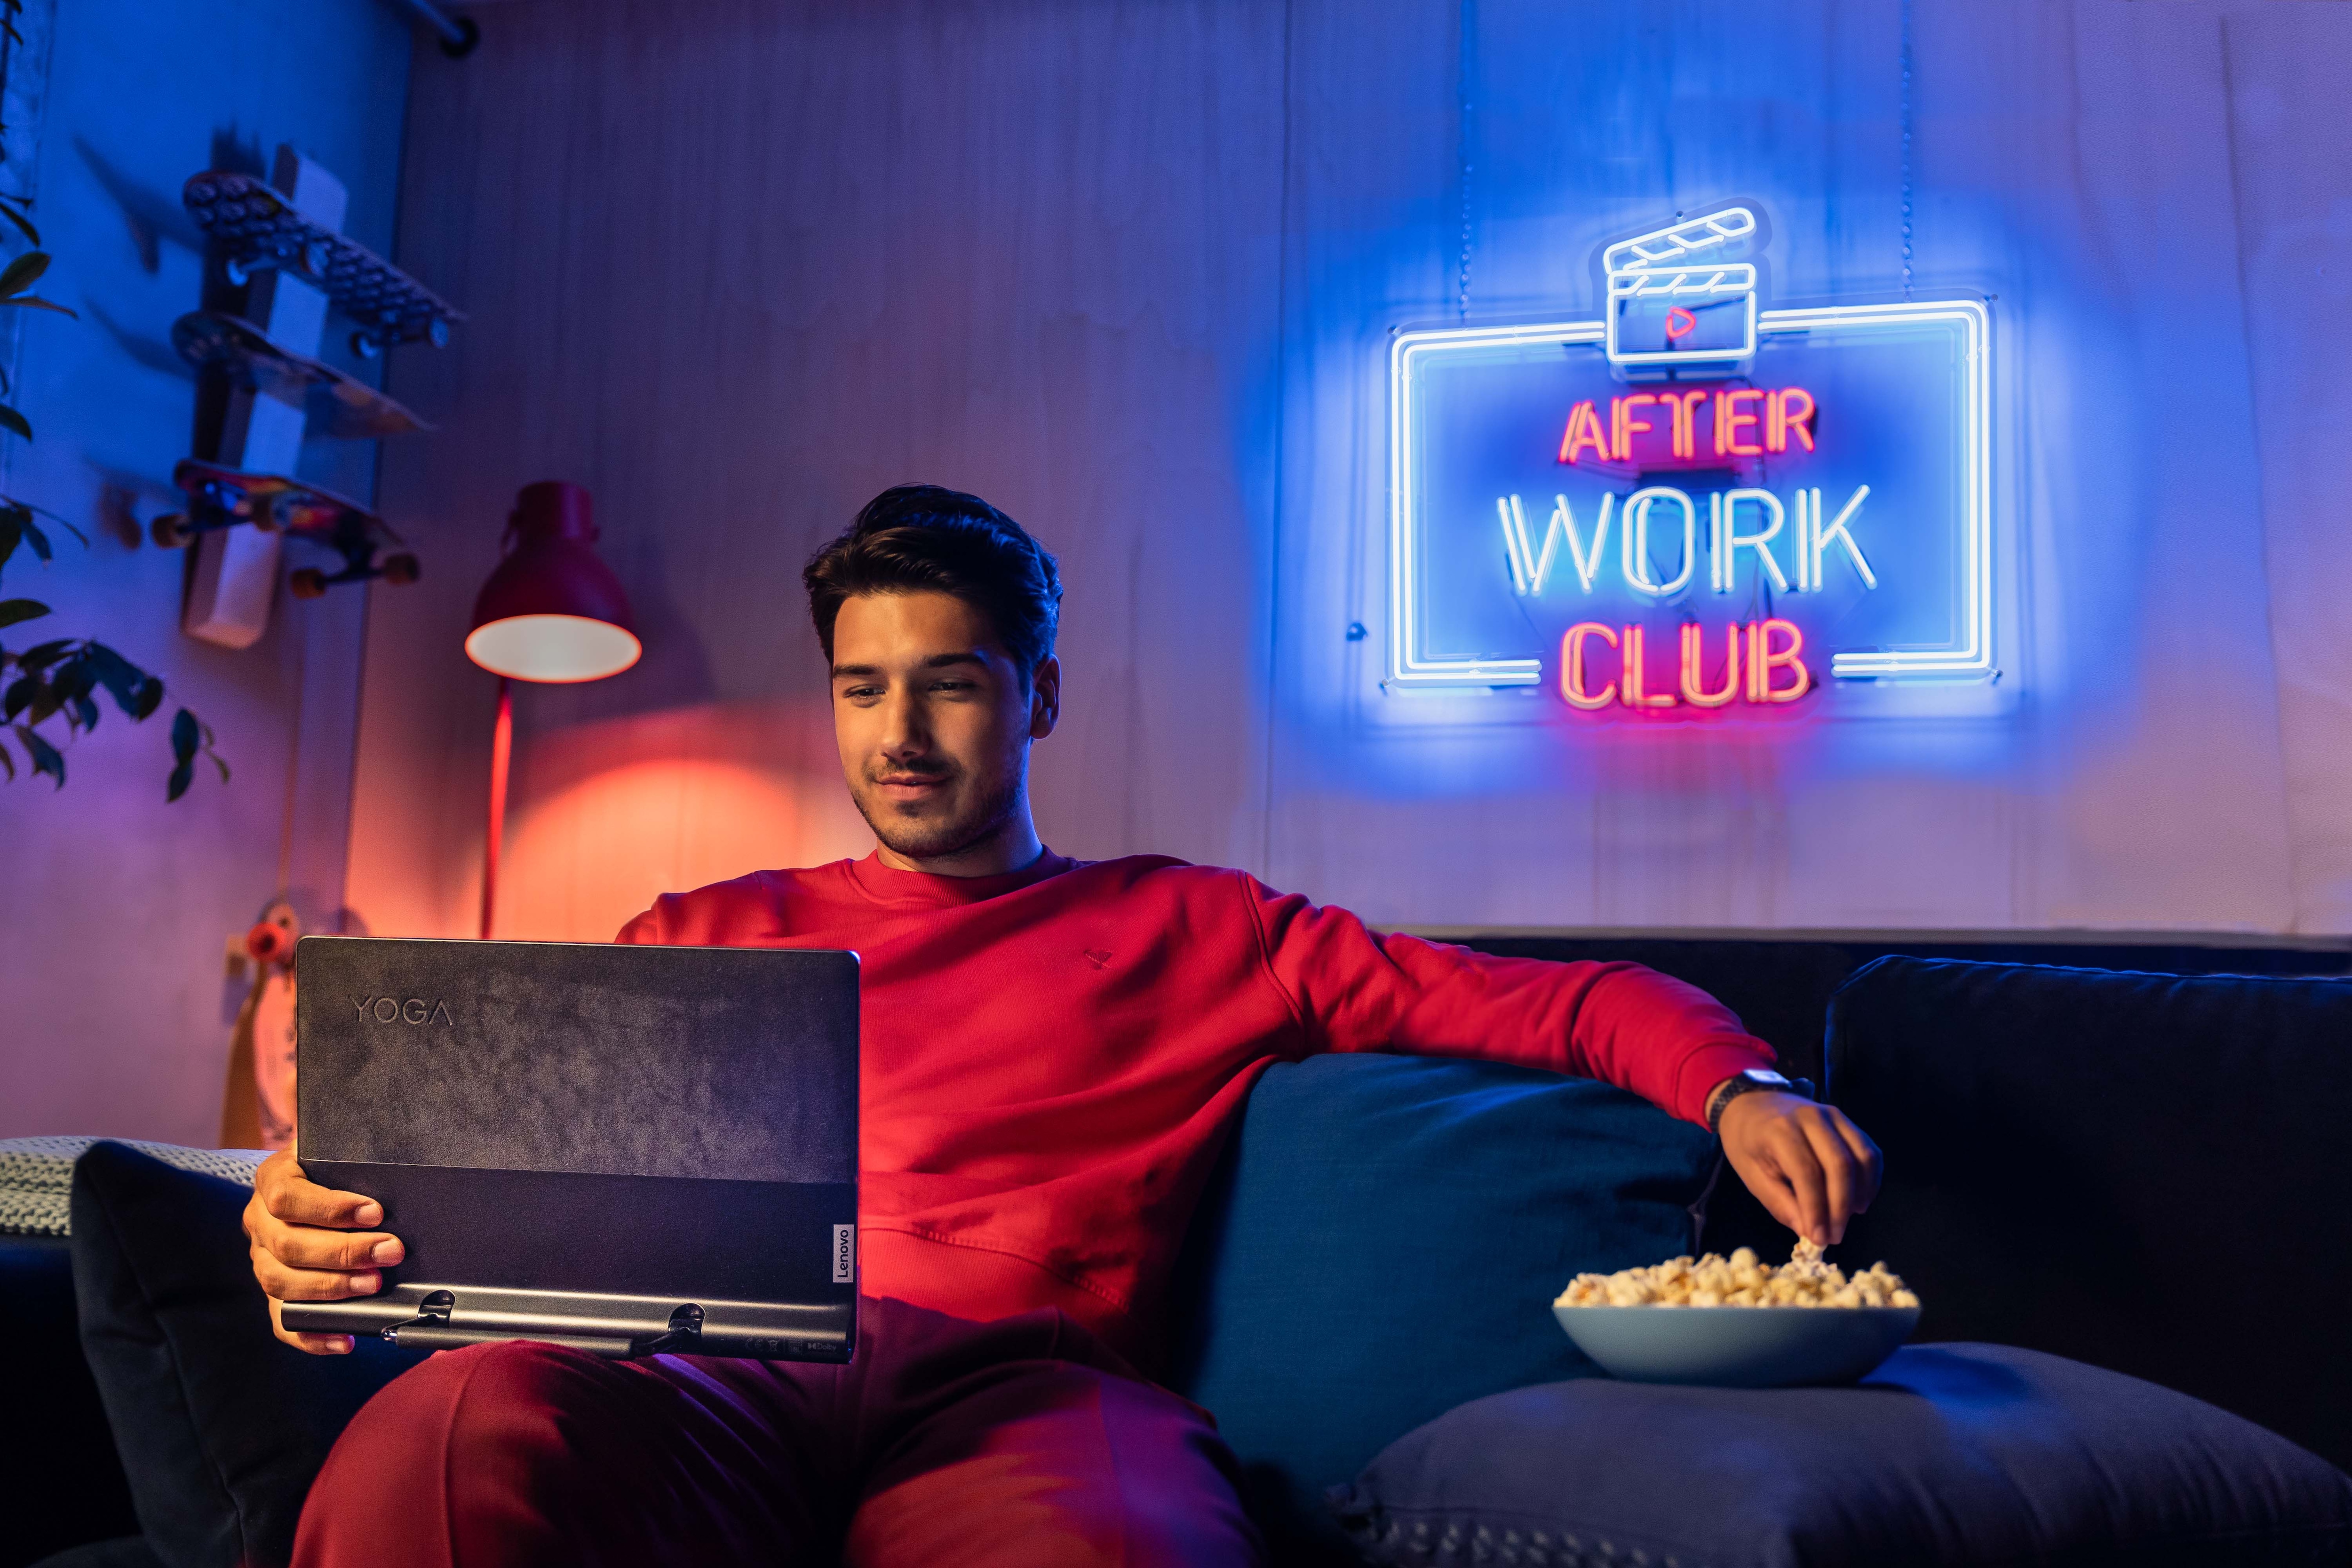 Man sitting on couch with a bowl of pop-corn, watching video on his Lenovo Yoga Tablet. A neon sign behind him read “After Work Club”.